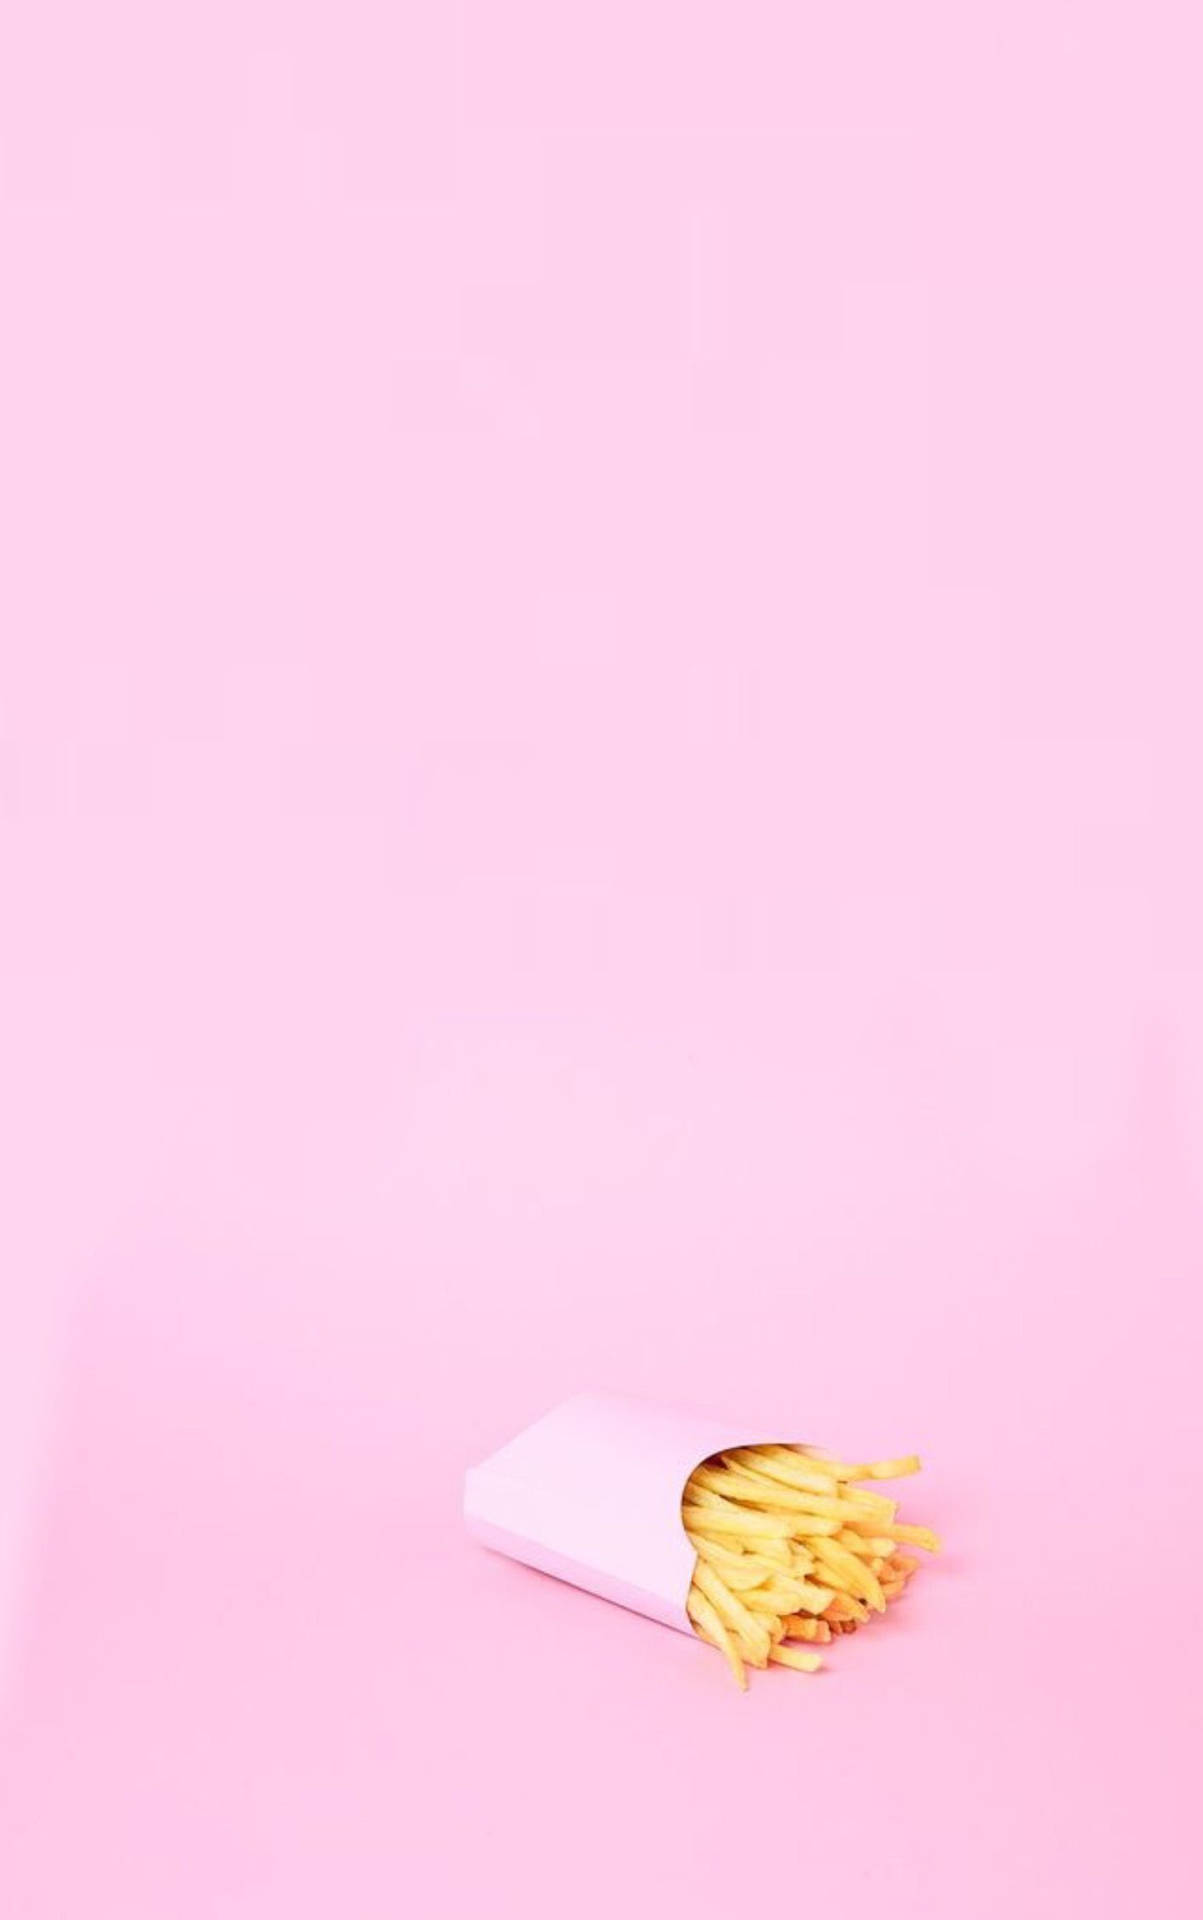 French Fries Plain Pink Background